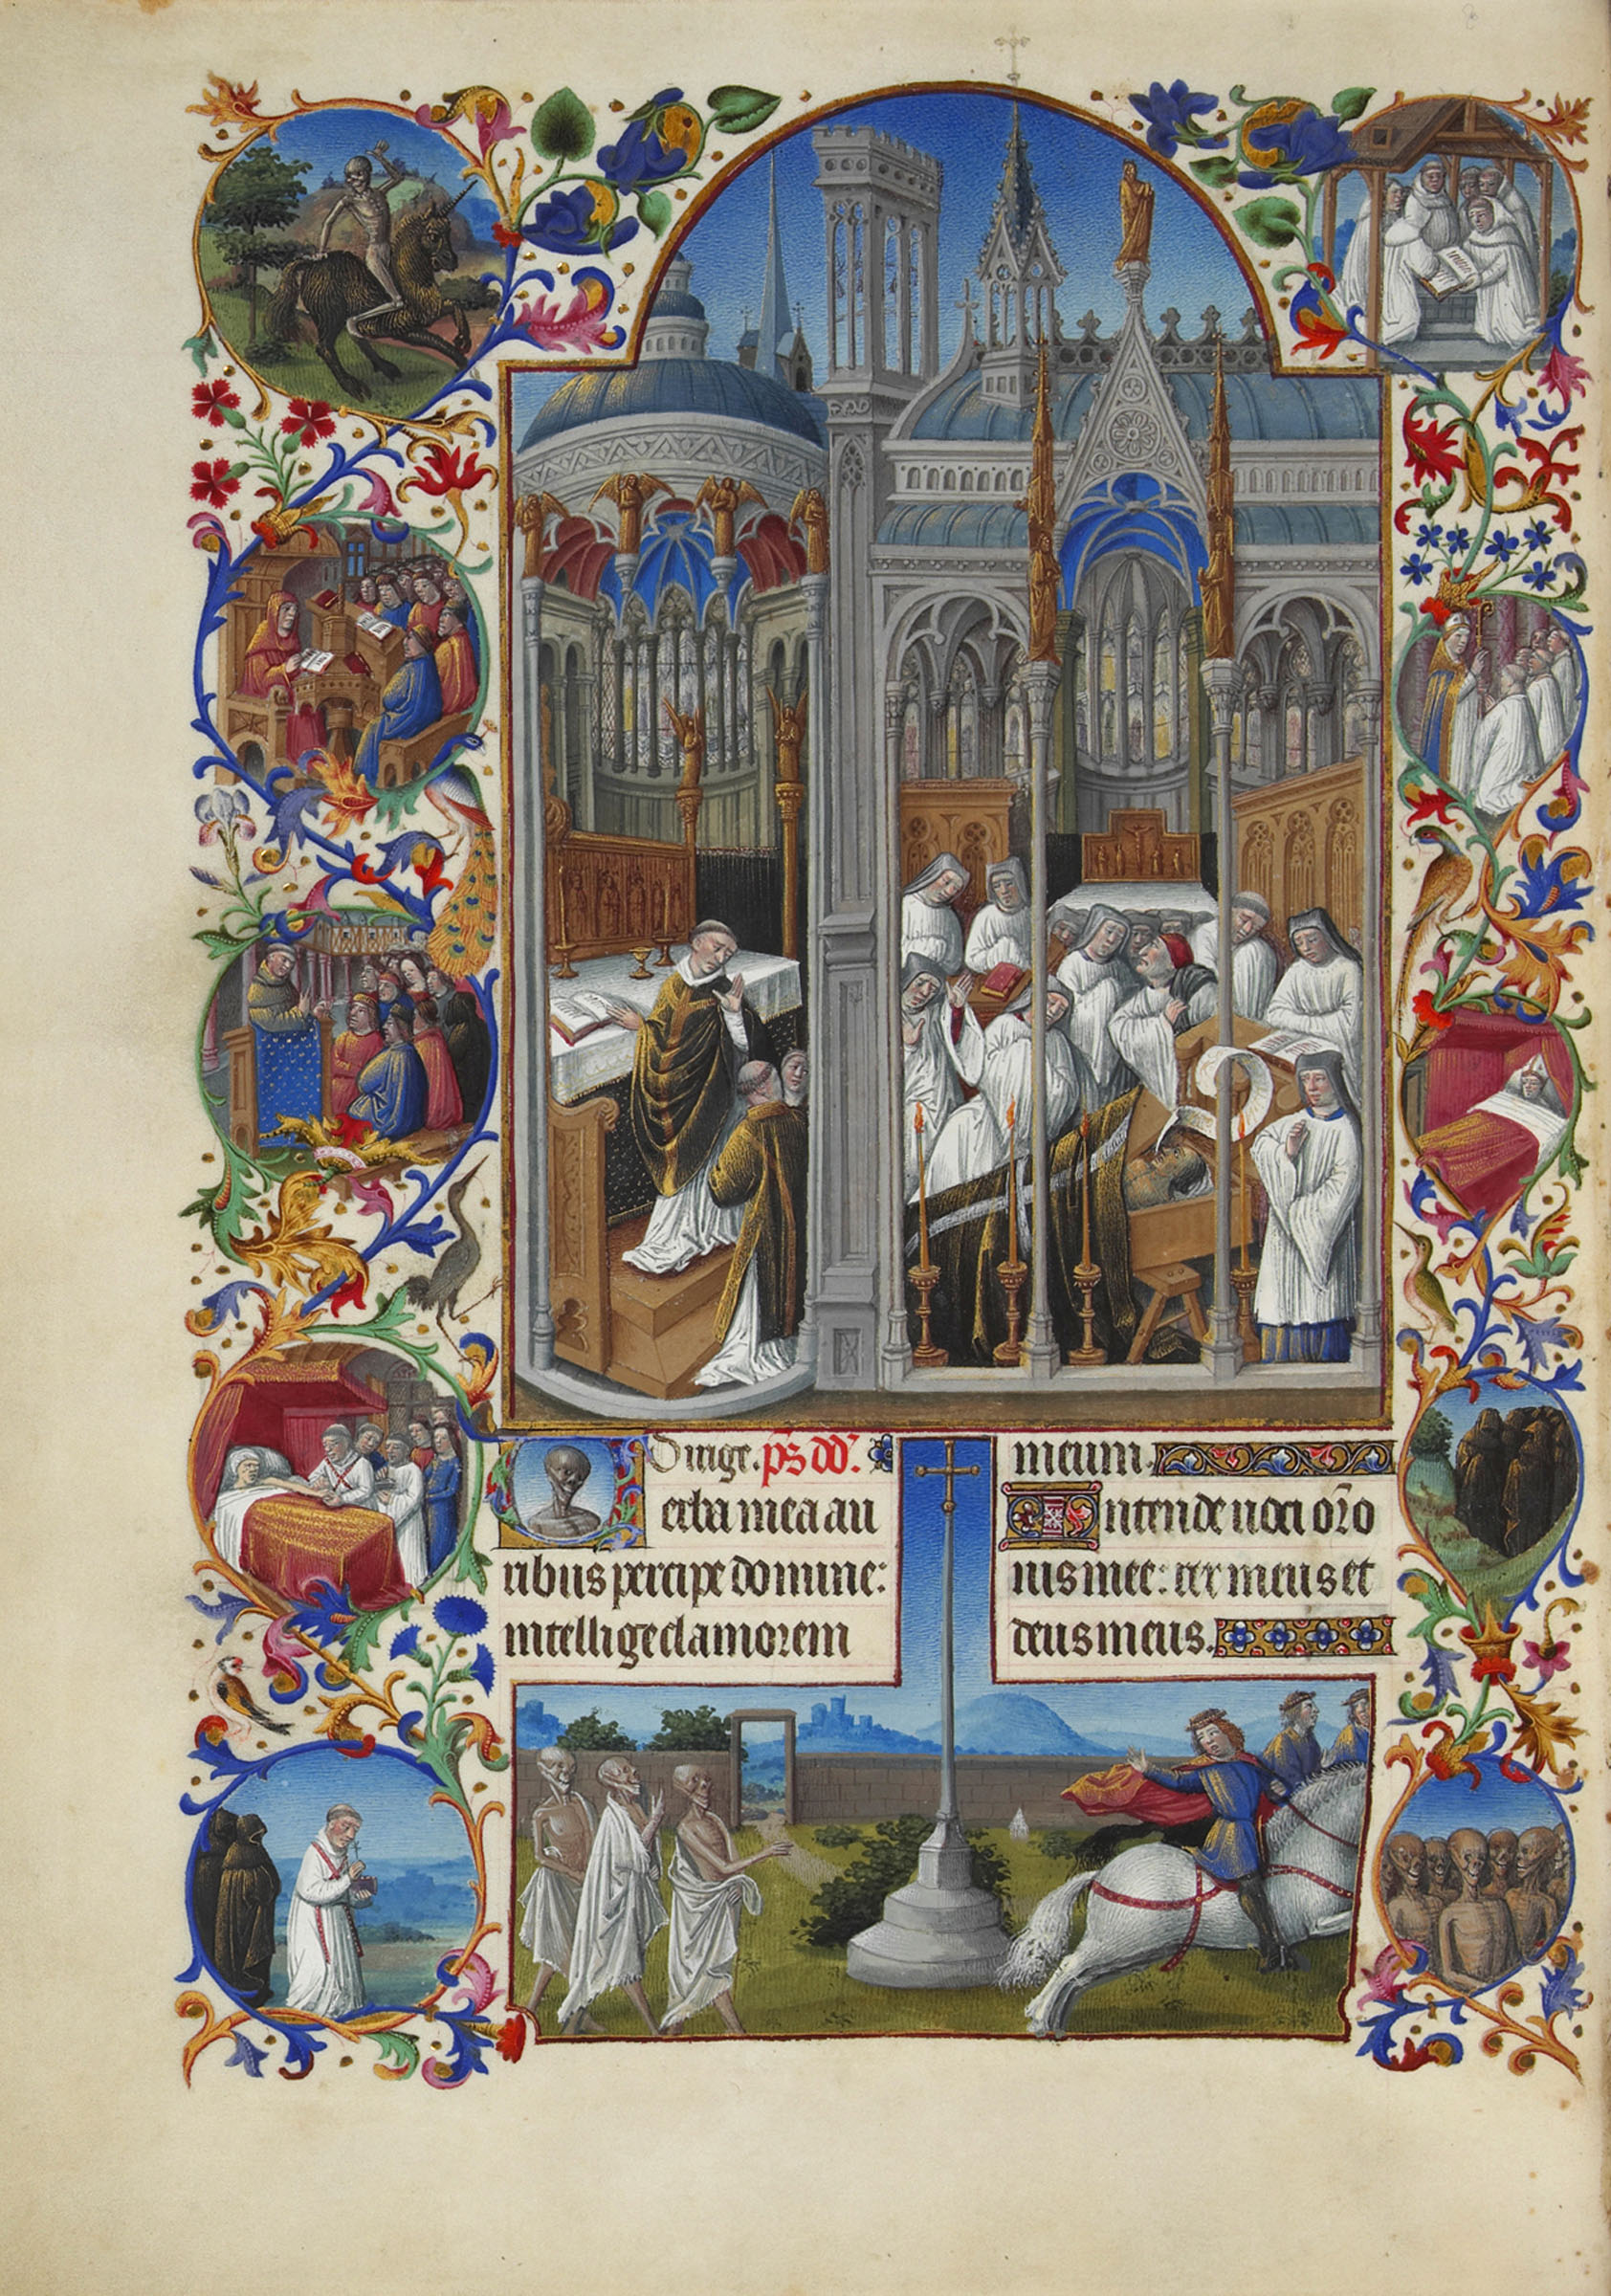 Les_Tres_Riches_Heures_du_duc_de_Berry-Musee-Conde-Chantilly-MS-65-fol-86v-Obseques-de-Raymond-Diocres-1411-16-termine-Jean-Colombe